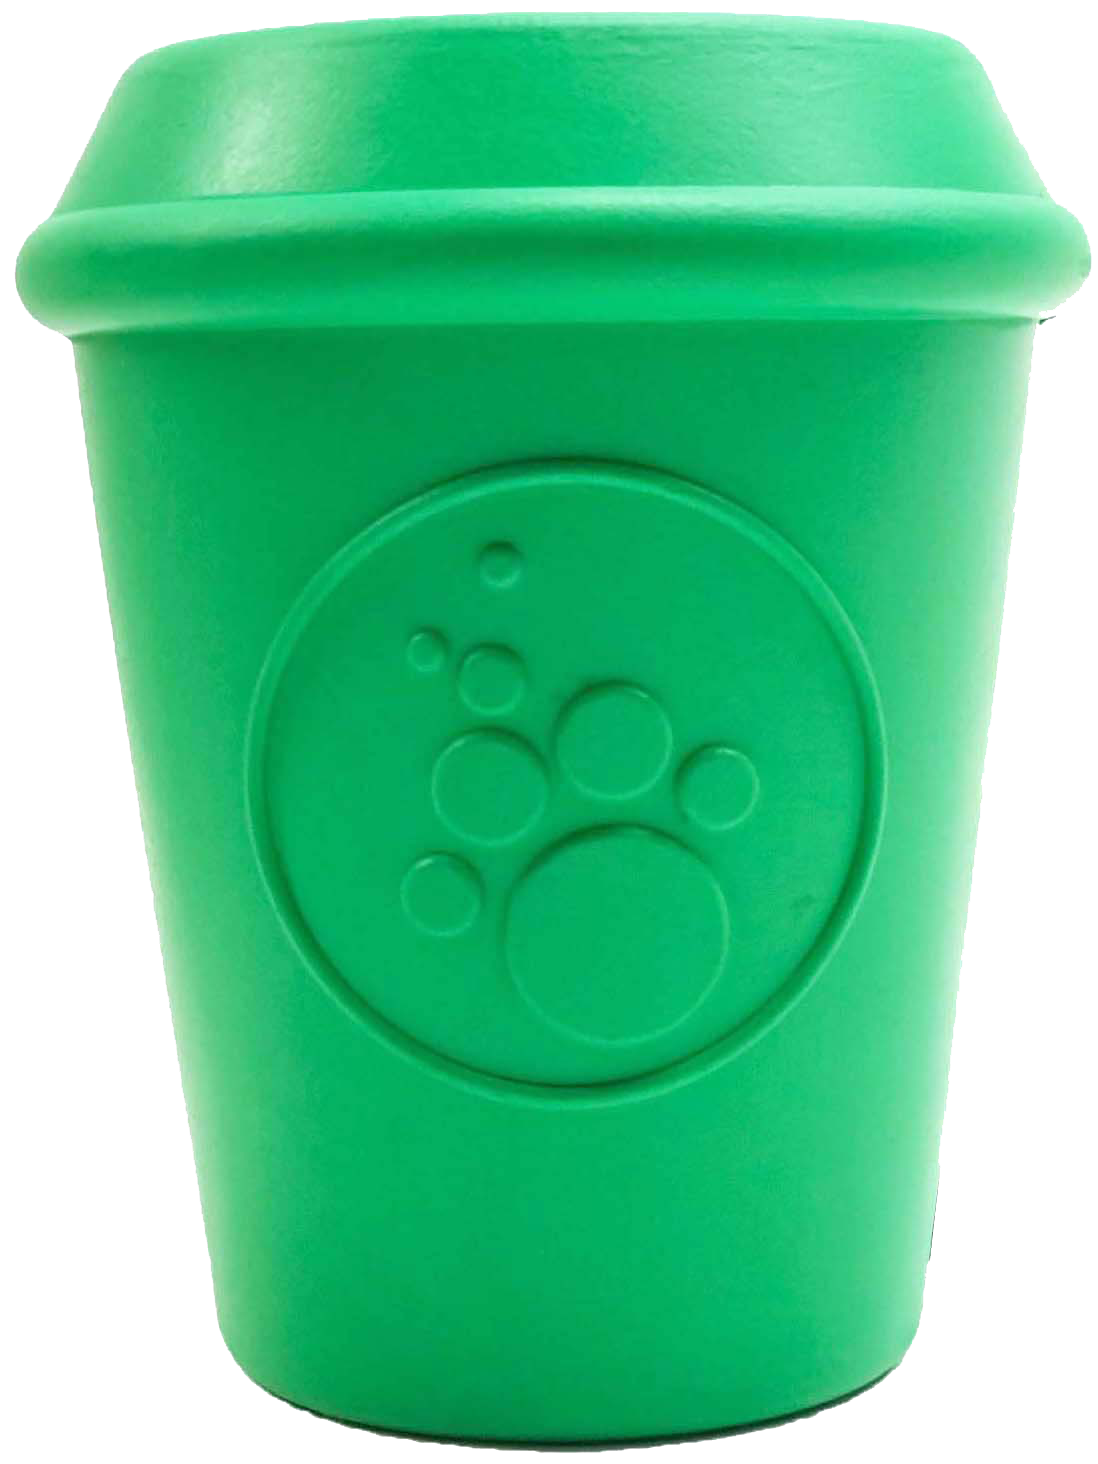 A durable green plastic cup from the Your Whole Dog Soda Pup COFFEE CUP TOY & TREAT DISPENSER (M & L) range with a paw print on it.